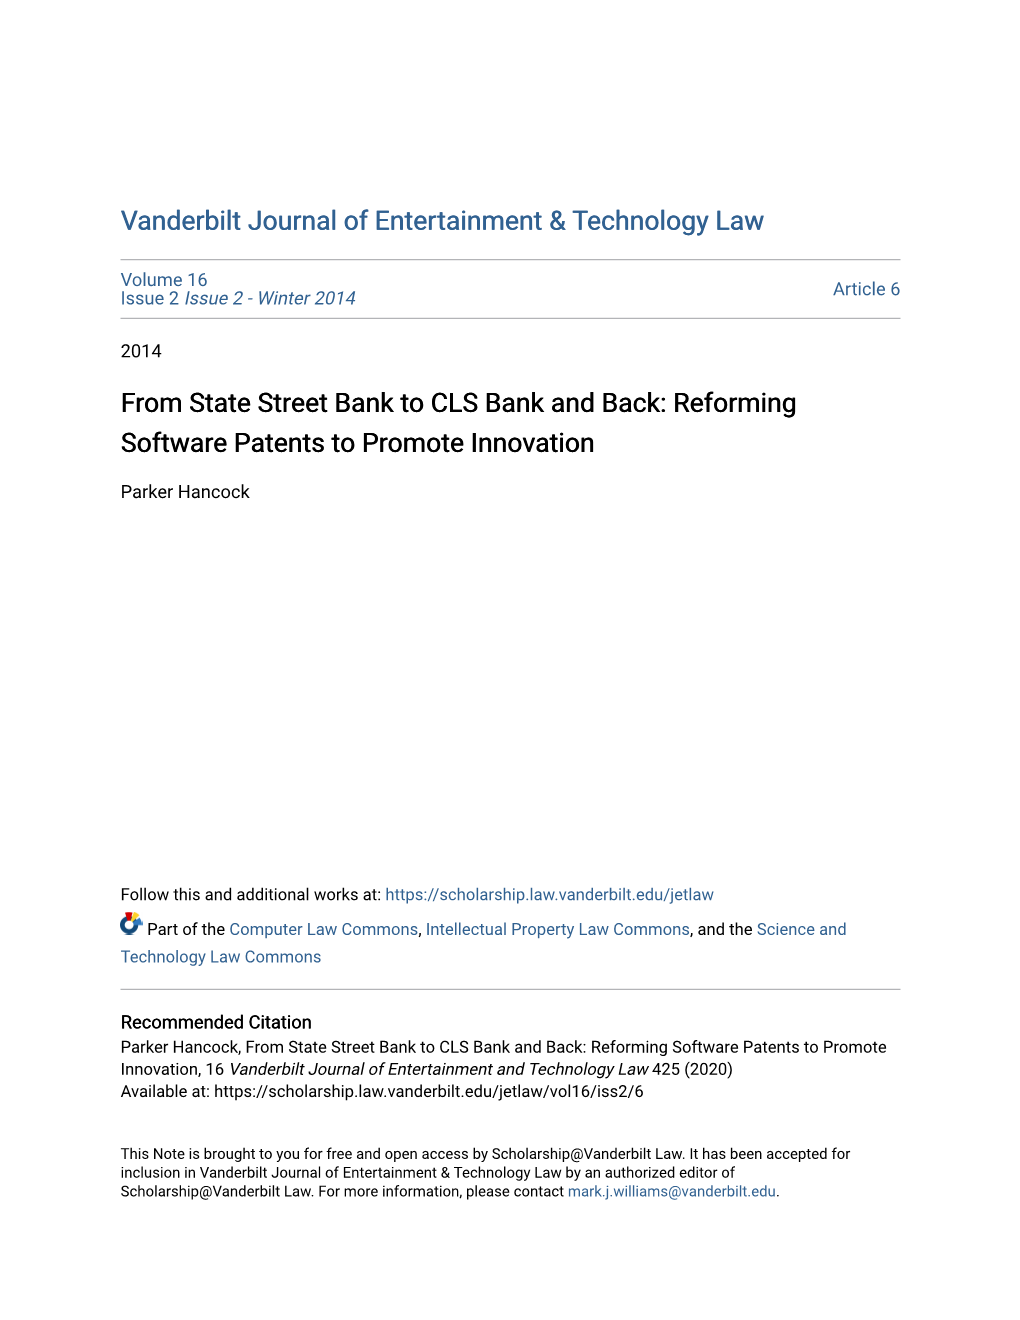 From State Street Bank to CLS Bank and Back: Reforming Software Patents to Promote Innovation